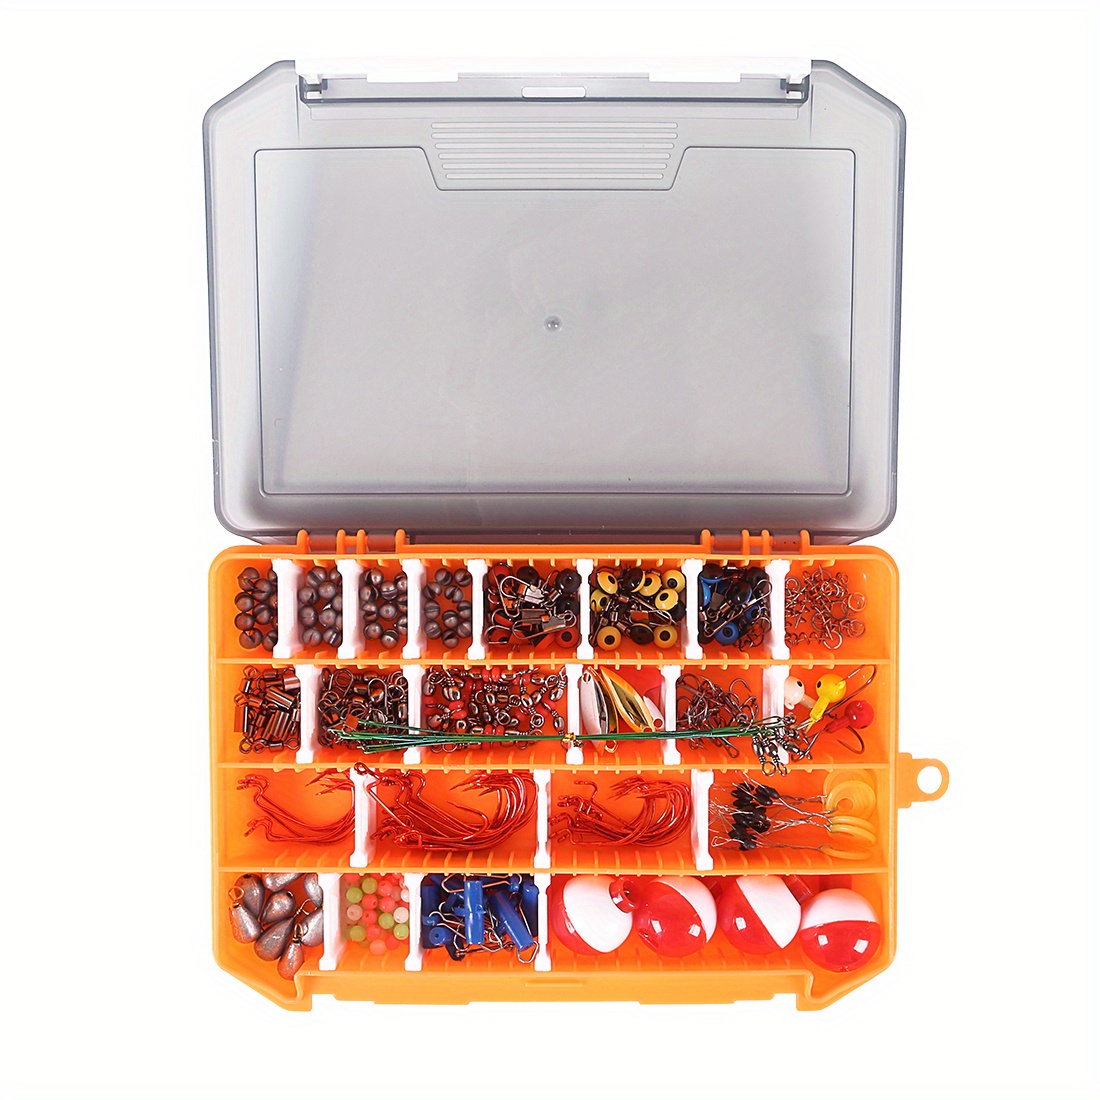 263pcs Complete Fishing Tackle Kit with Box - Jig Hooks, Beads, Swivel  Snap, Weights, Bobbers - Ideal for Freshwater and Saltwater Fishing